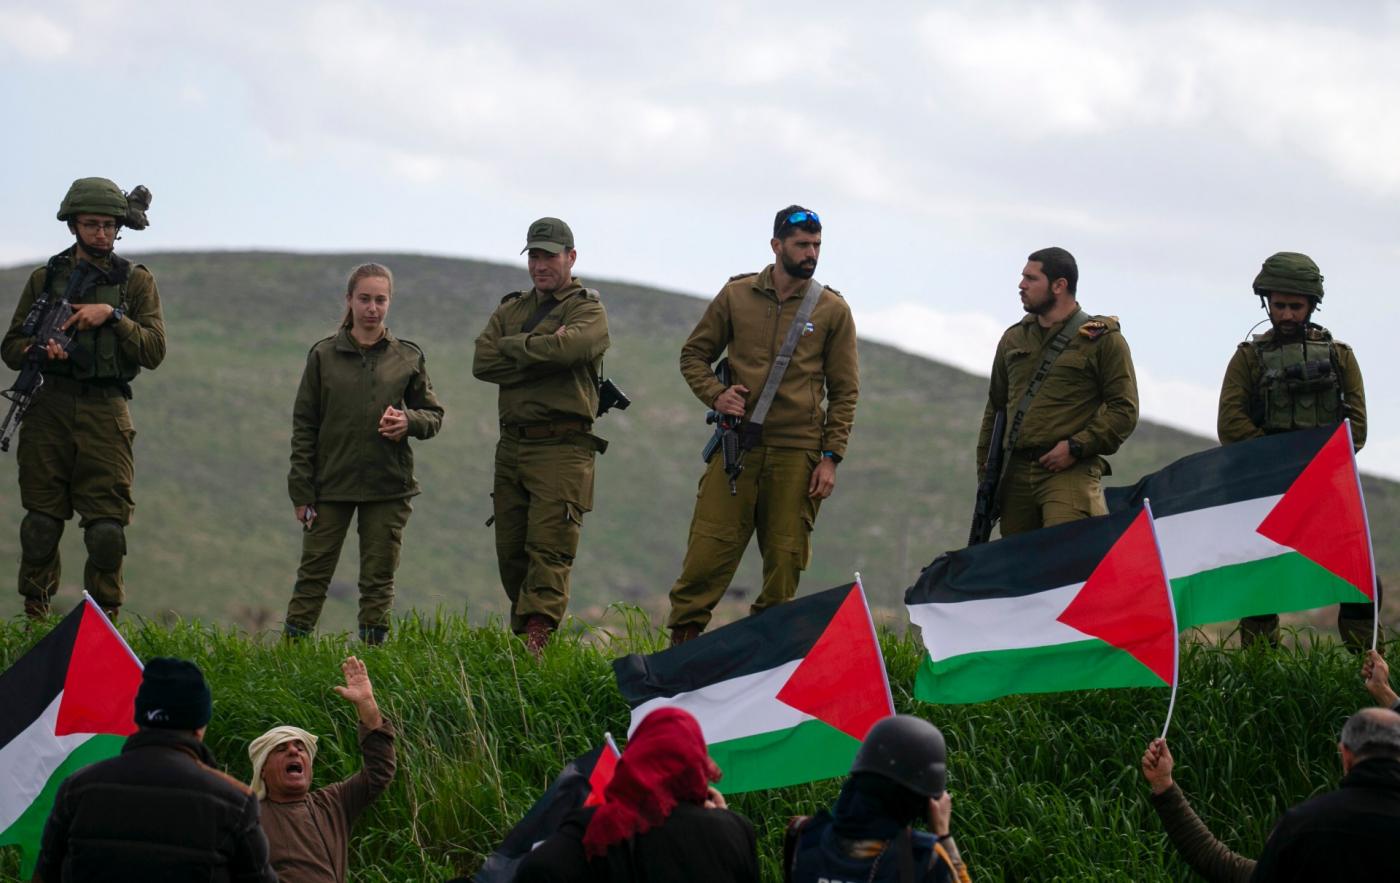 sraeli soldiers stand at attention as Palestinian demonstrators take part in a protest against the annexation of the Jordan Valley, in the village of Tammun (AFP)